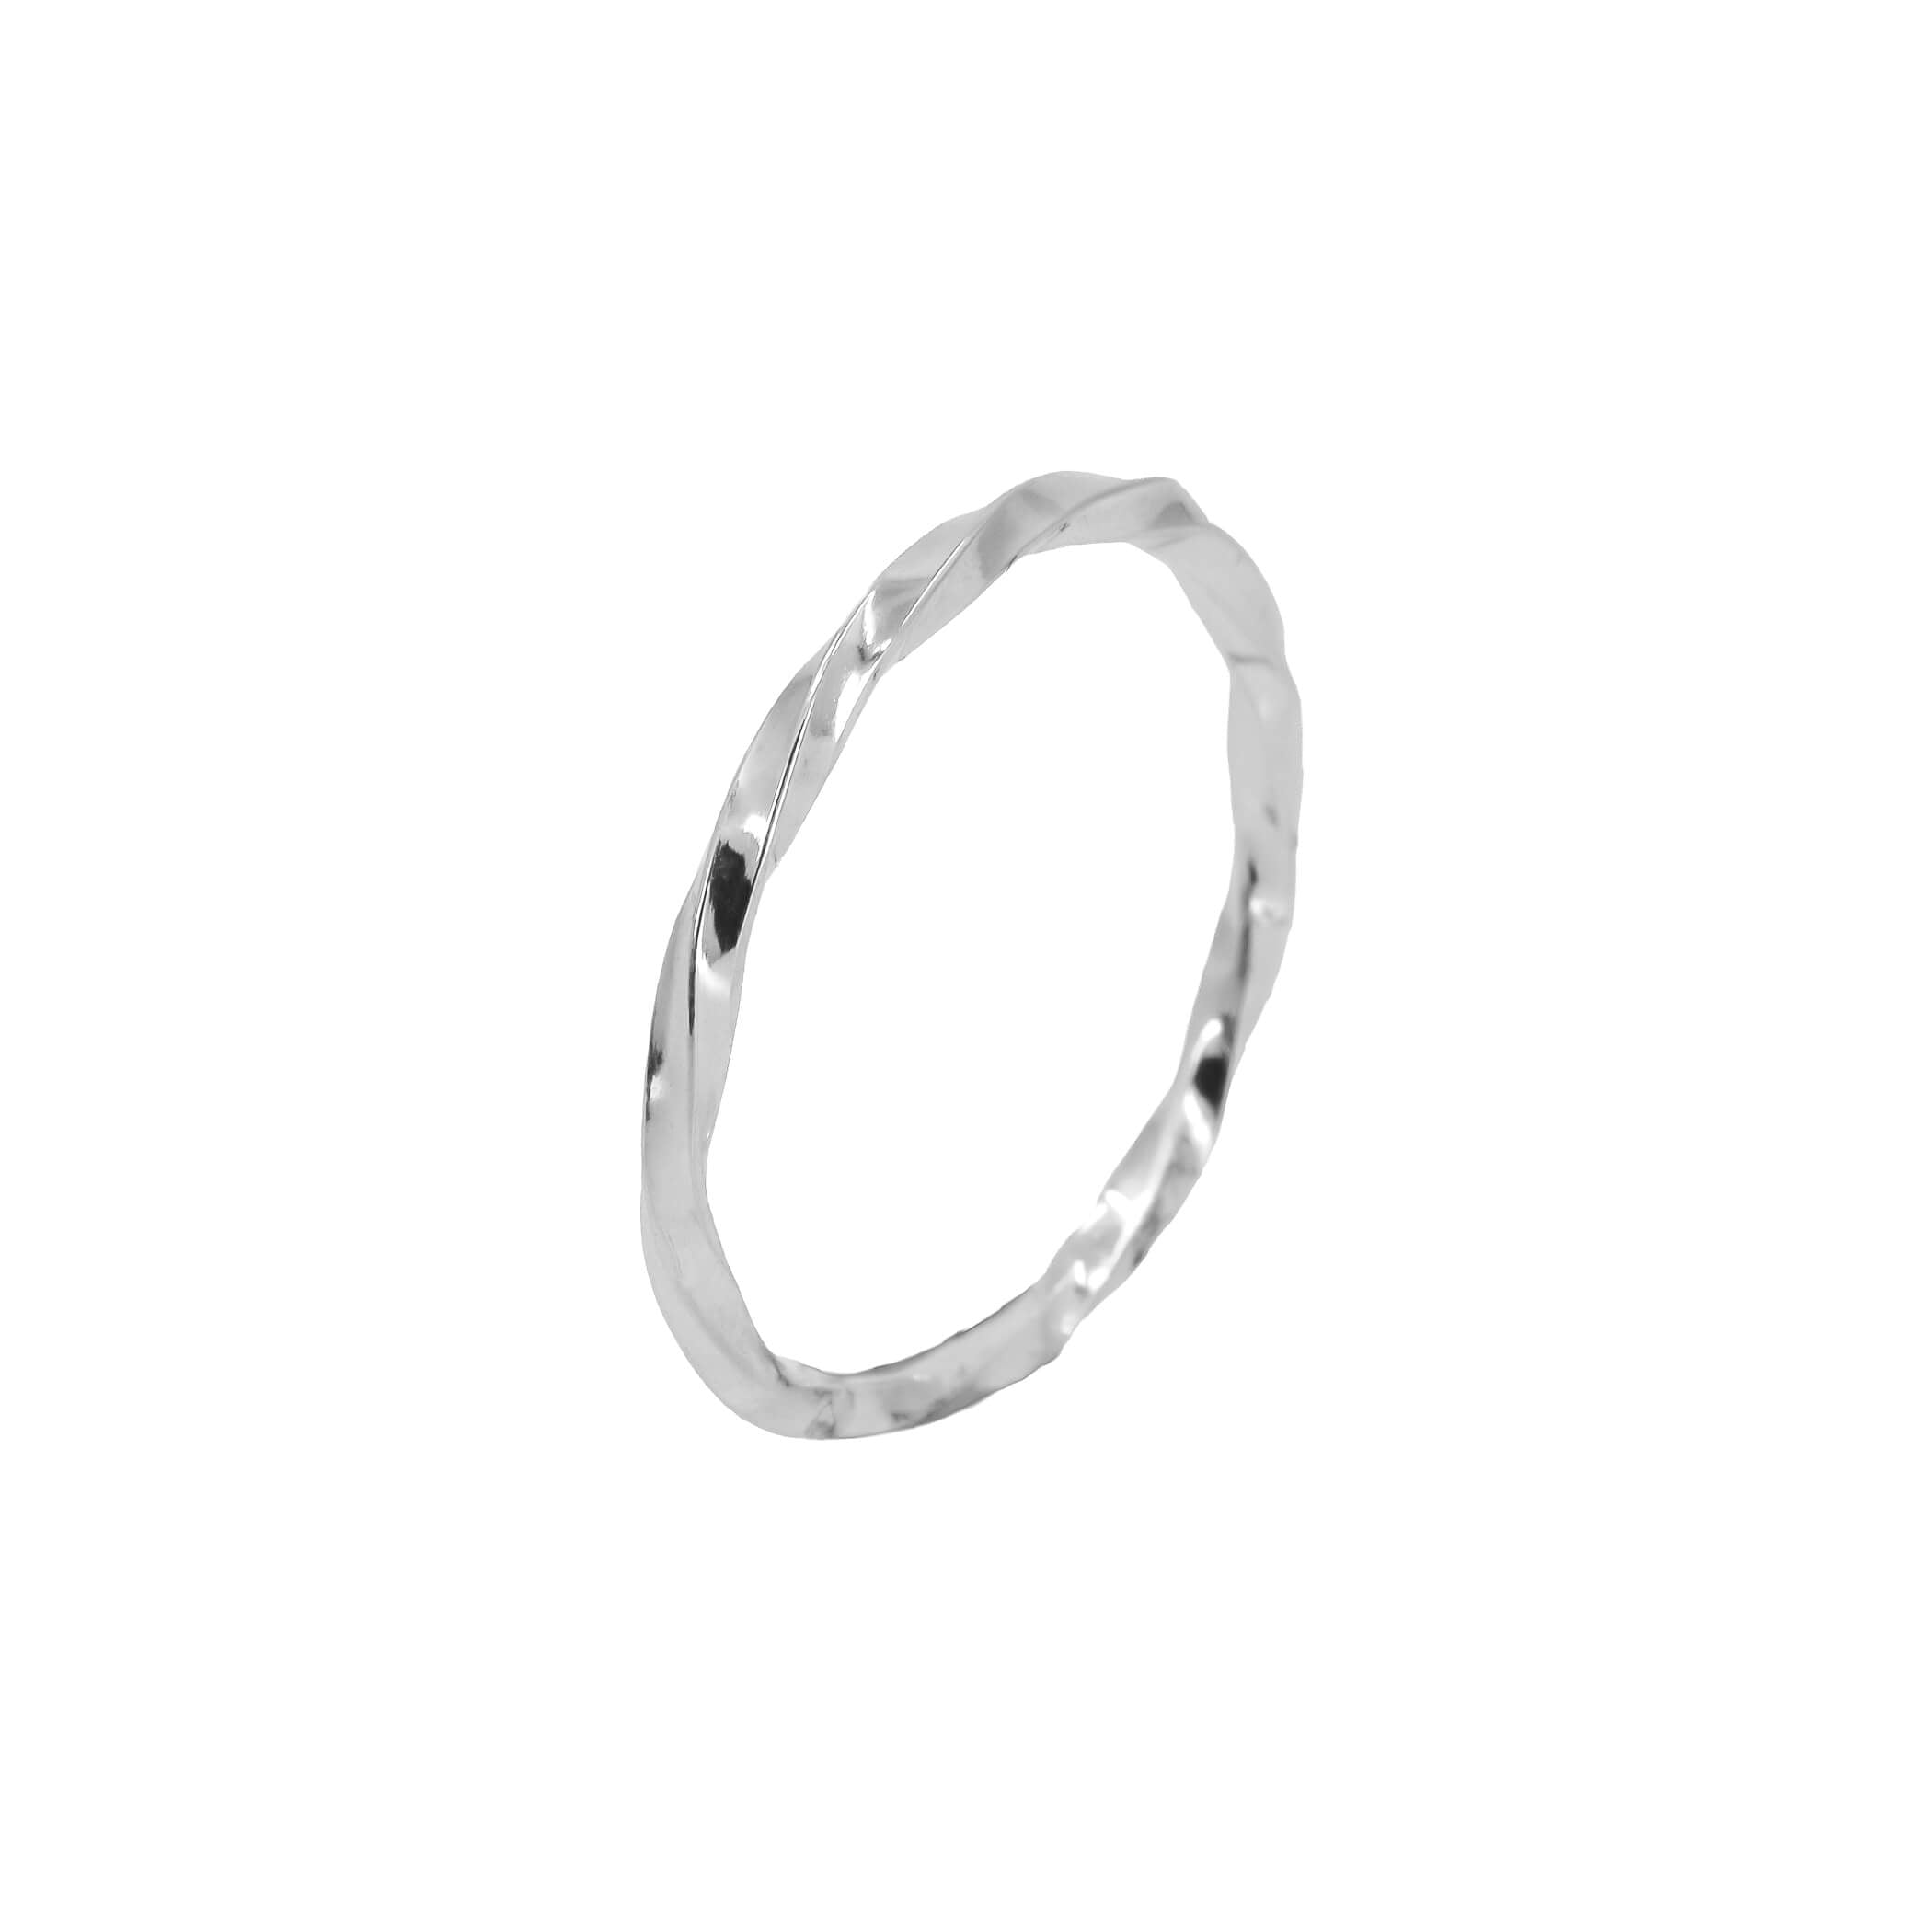 Twisted rope sterling silver stacking ring